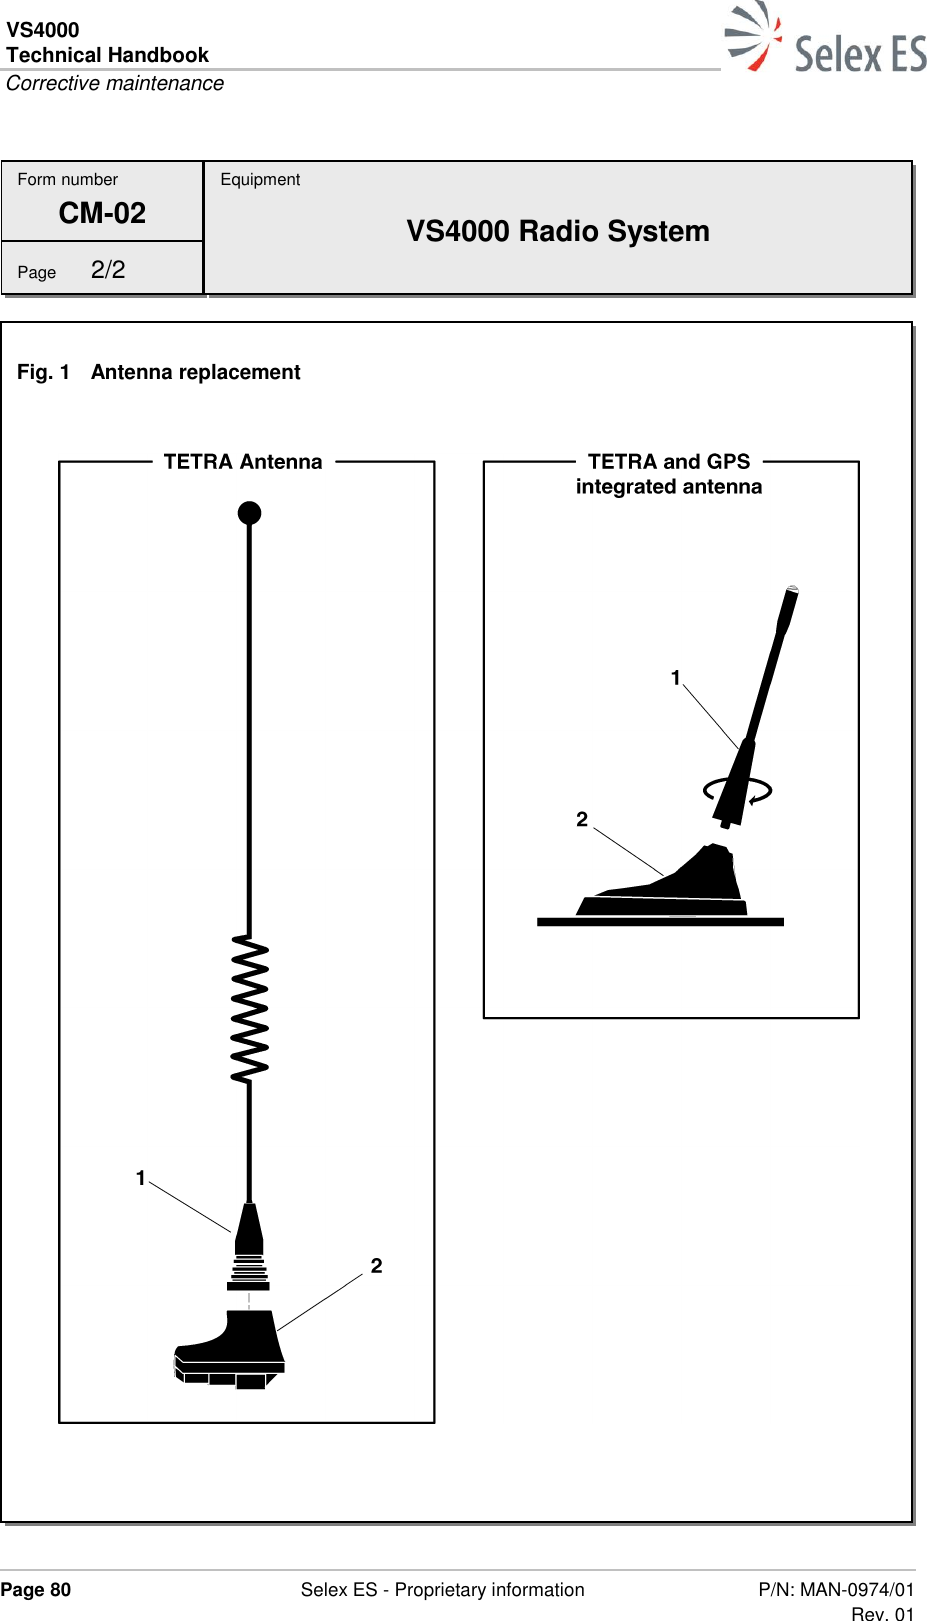 VS4000 Technical Handbook  Corrective maintenance  Page 80  Selex ES - Proprietary information P/N: MAN-0974/01 Rev. 01    Form number CM-02 Page  2/2  Fig. 1  Antenna replacement    Equipment VS4000 Radio System 